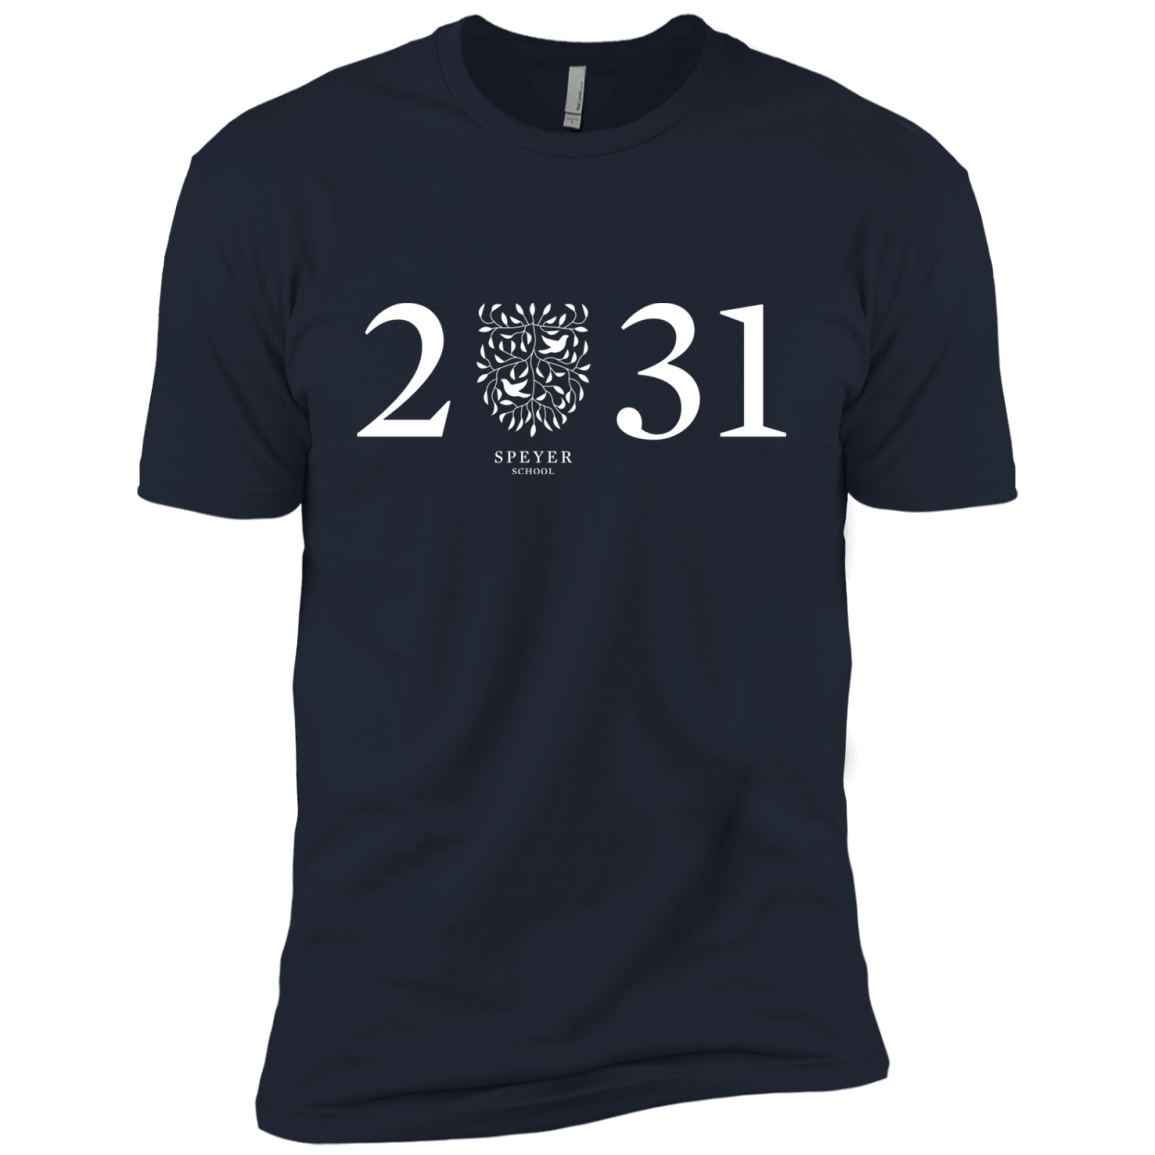 Class of 2031 T-Shirt, Youth Sizes